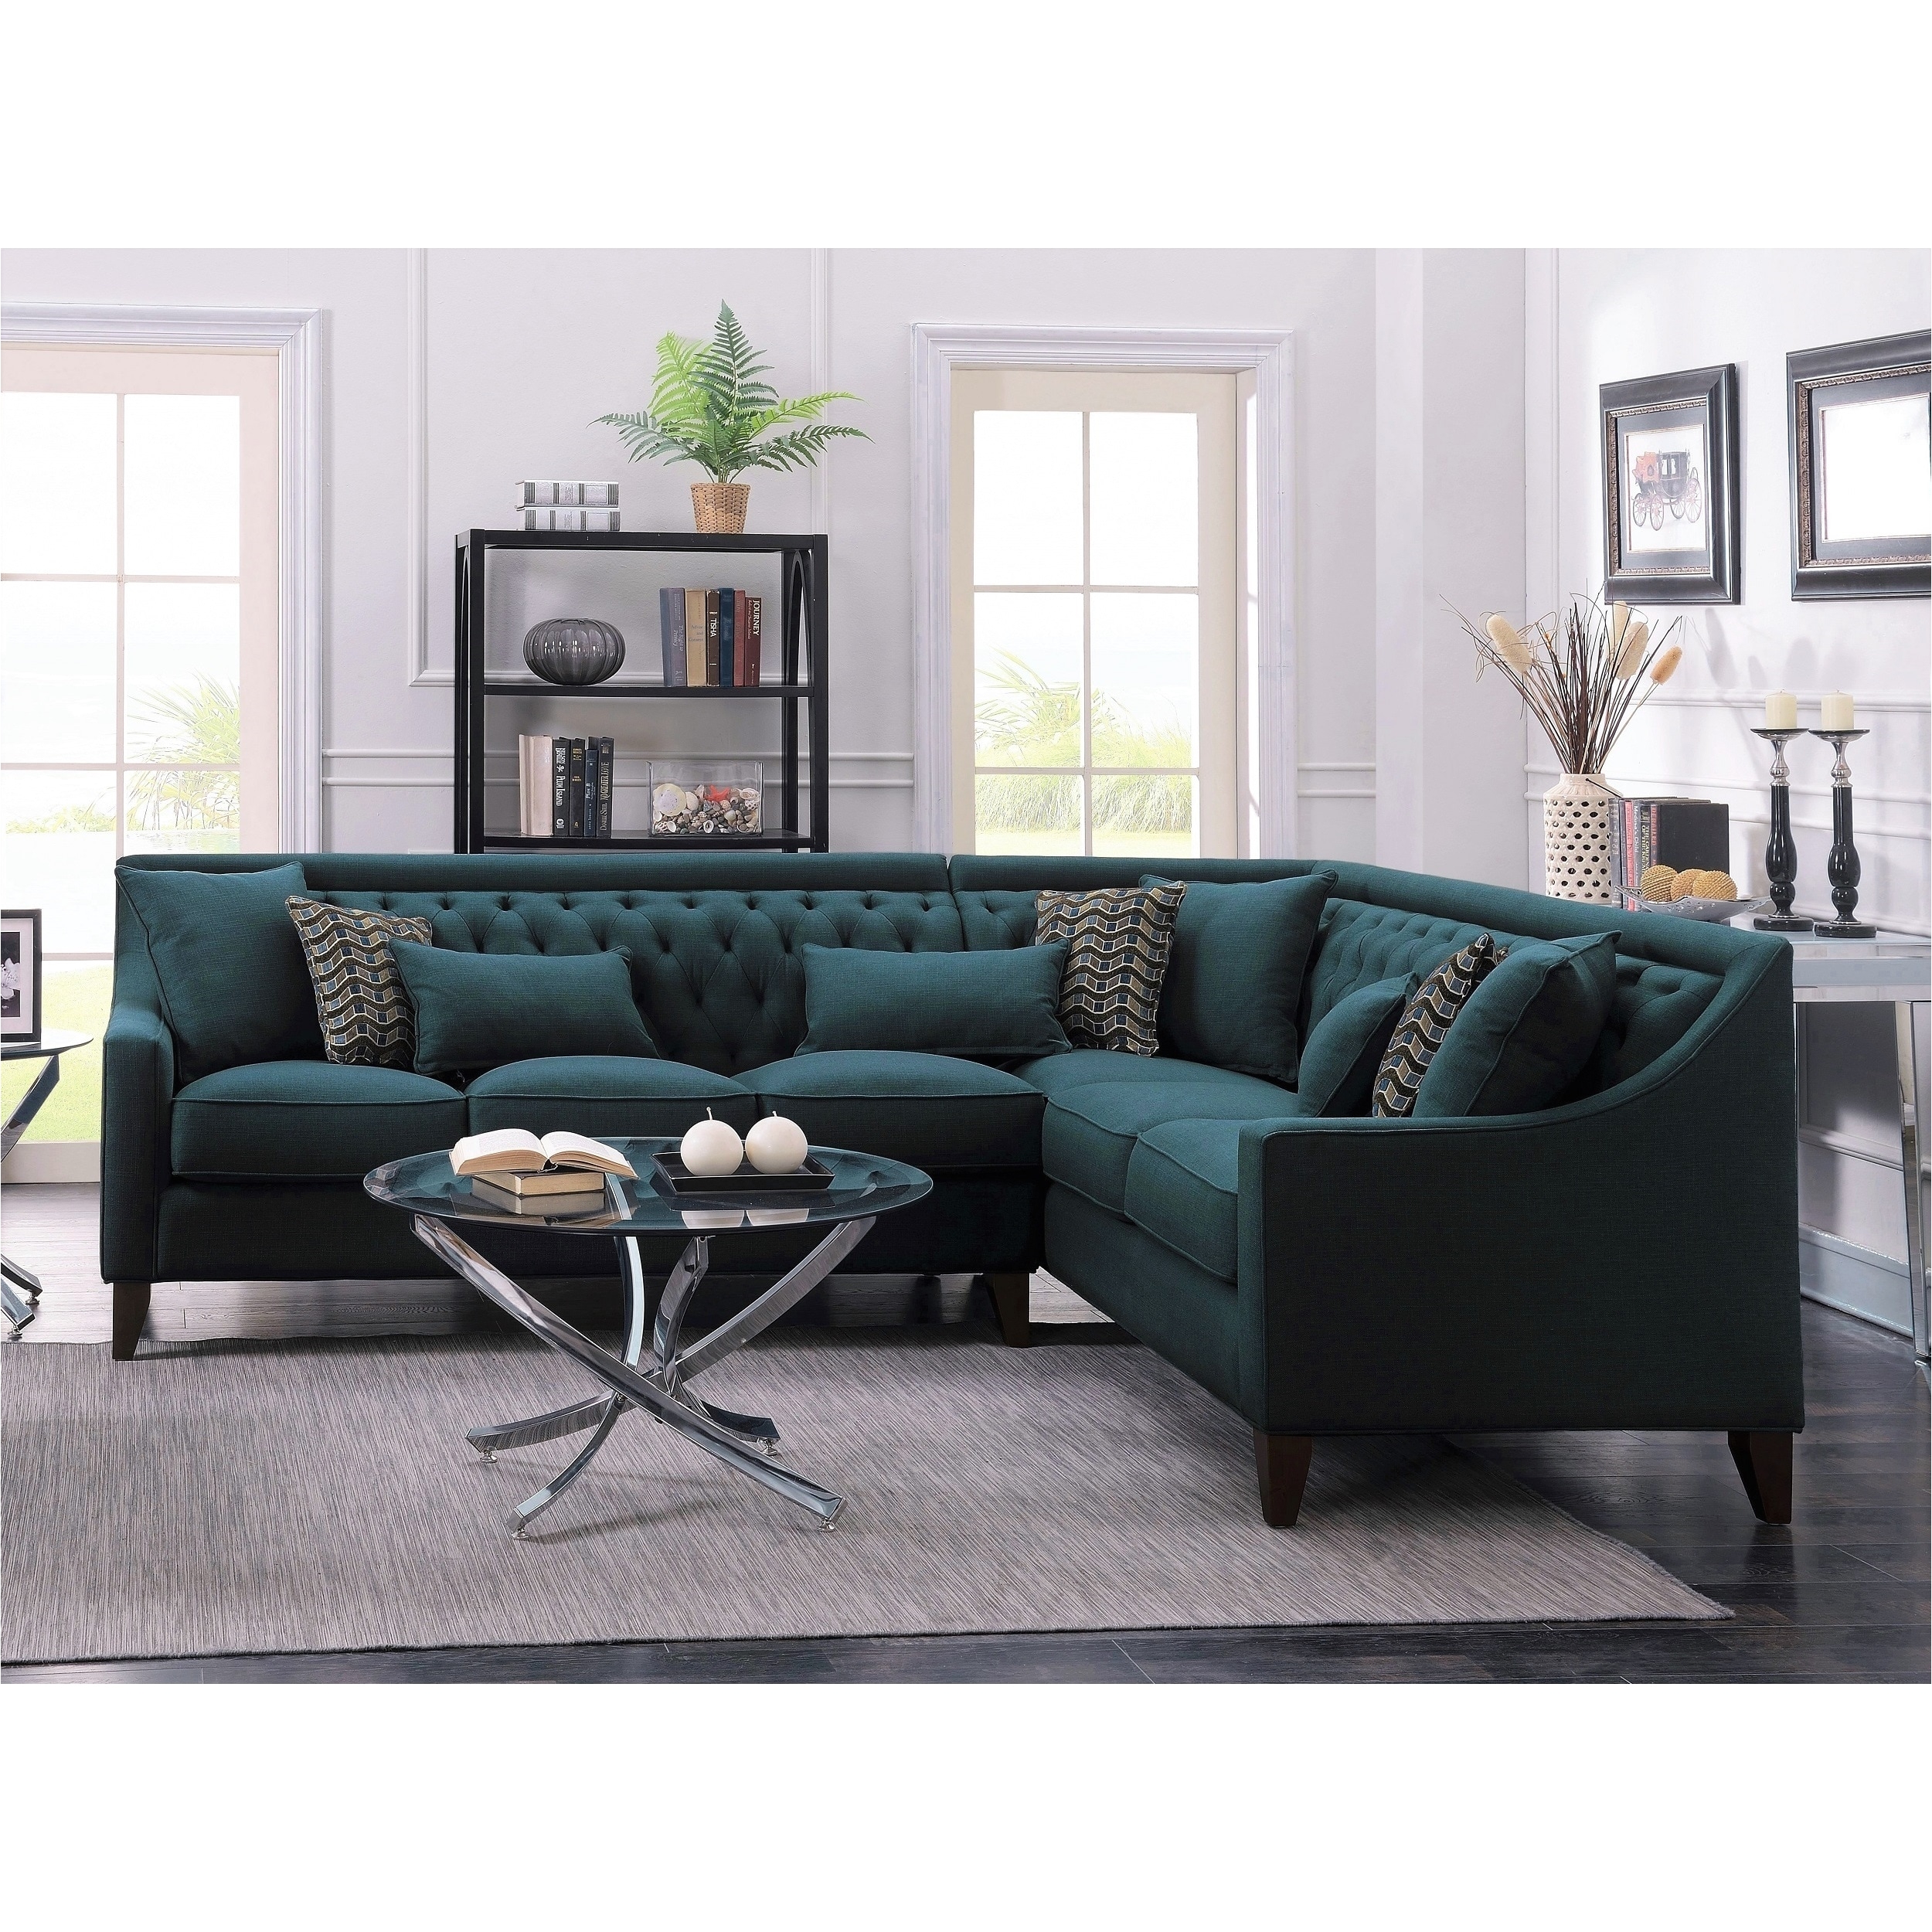 Chic Home Fulla Linen Tufted Back Rest Modern Contemporary Right Facing Sectional Sofa Teal Walmart